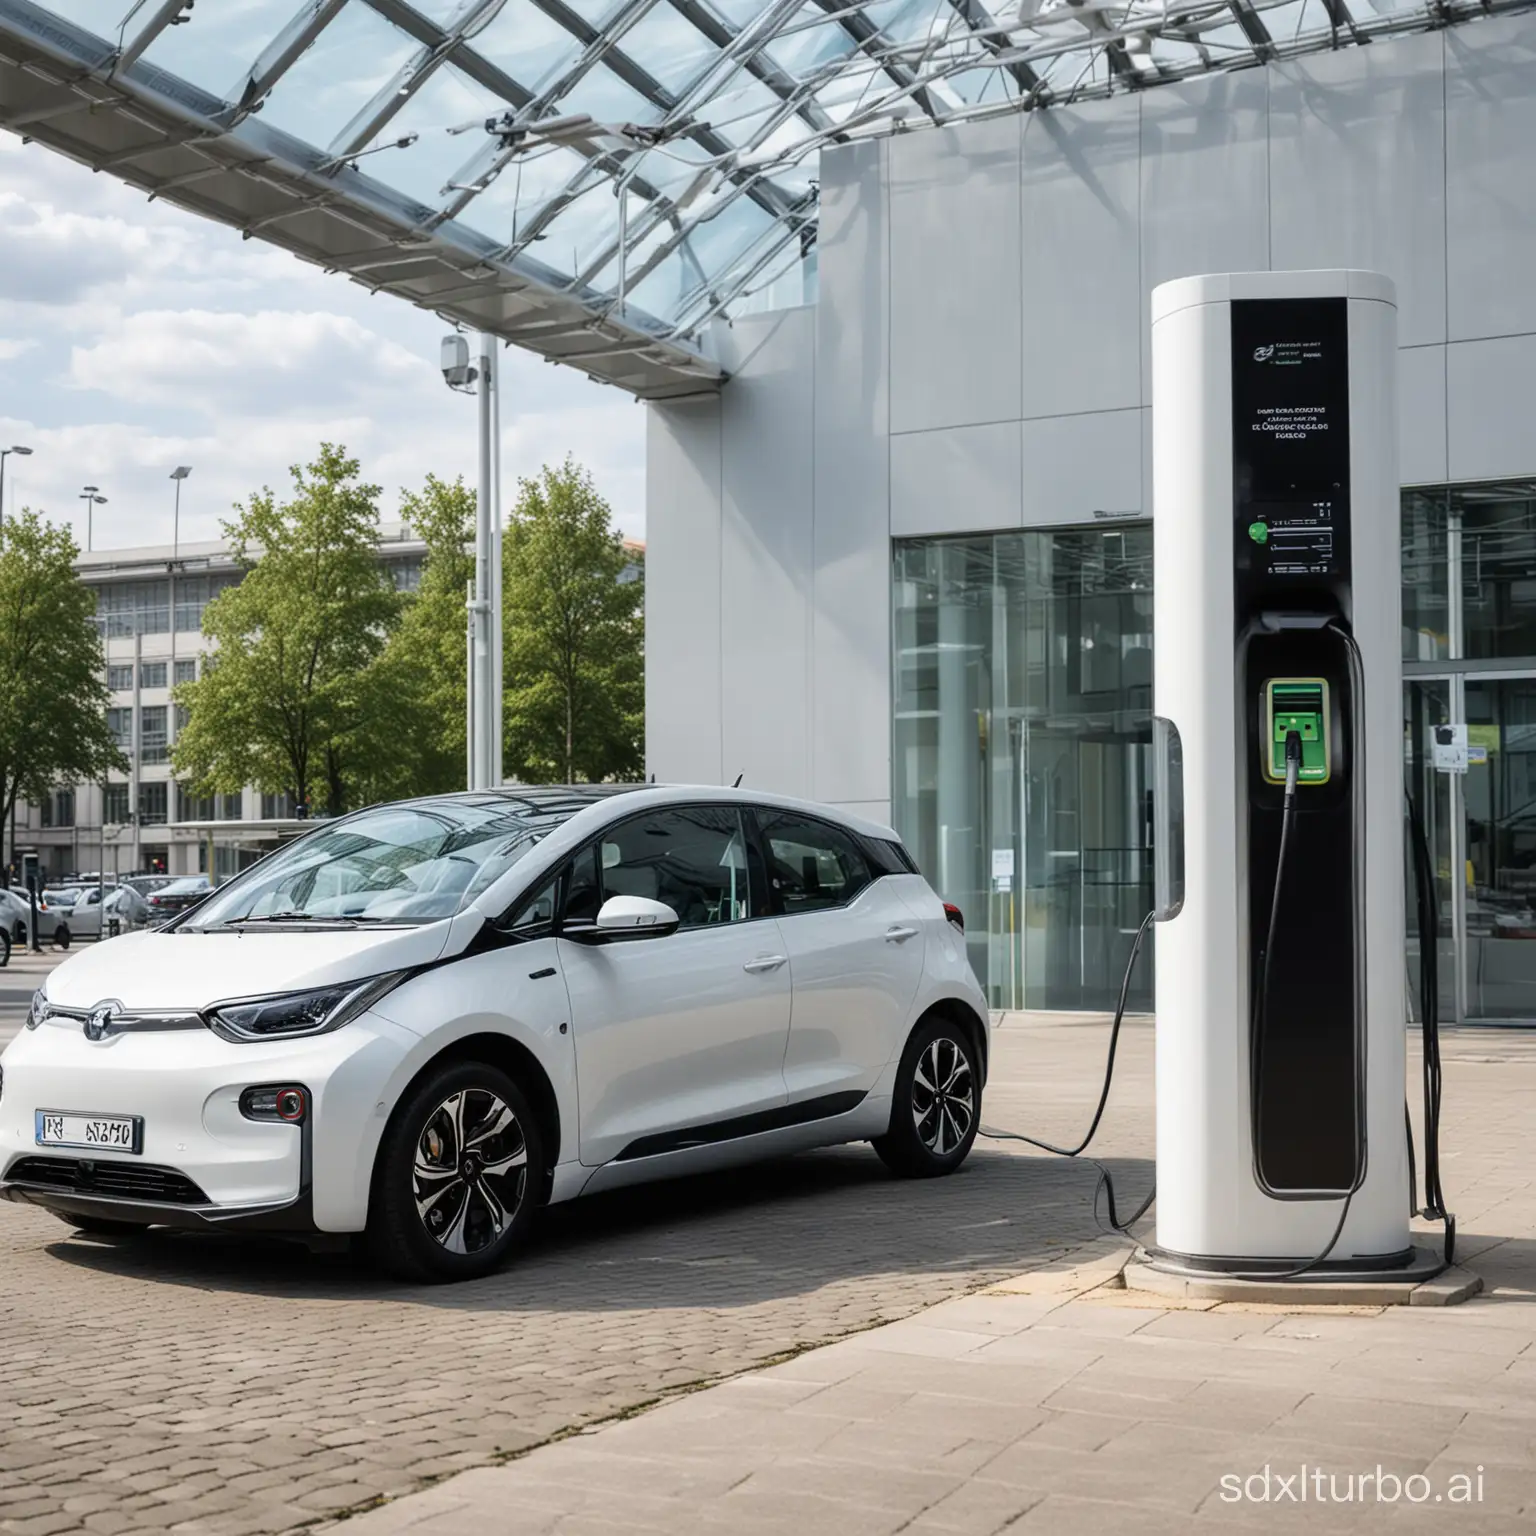 A new energy electric car, in a charging station, with a modern exhibition hall in the background.